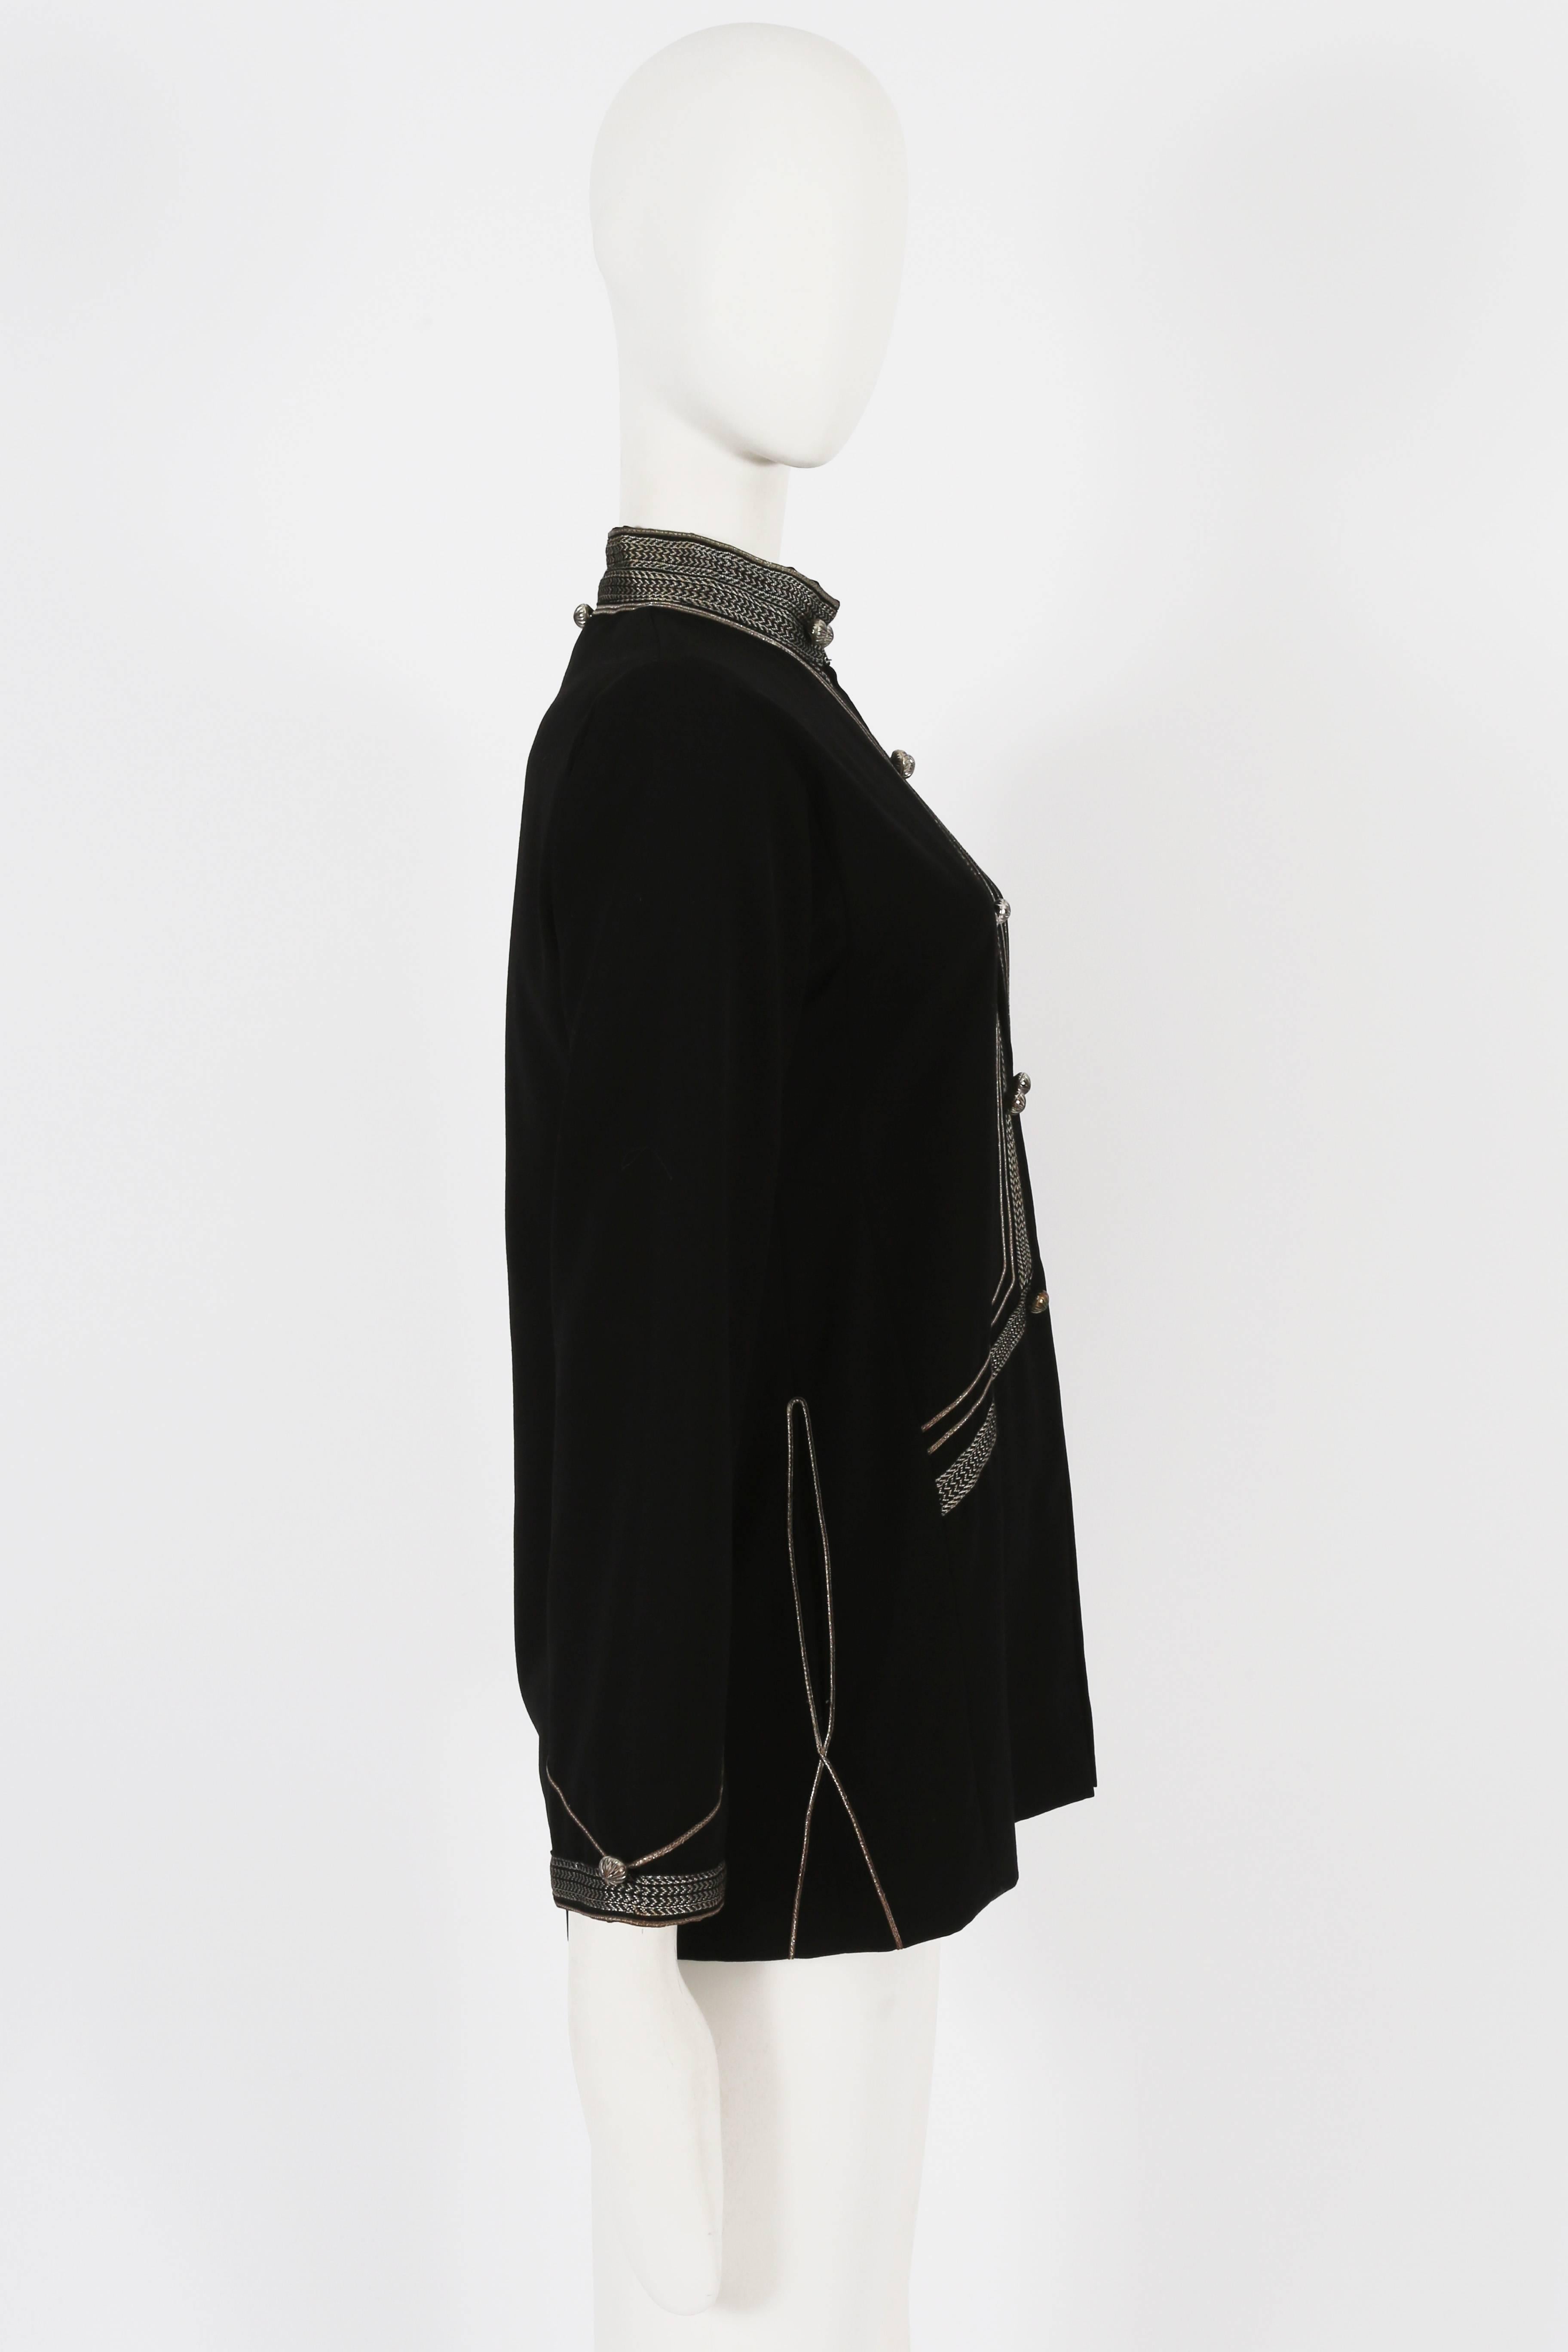 Women's Thea Porter embroidered evening wool jacket, c. 1960s For Sale